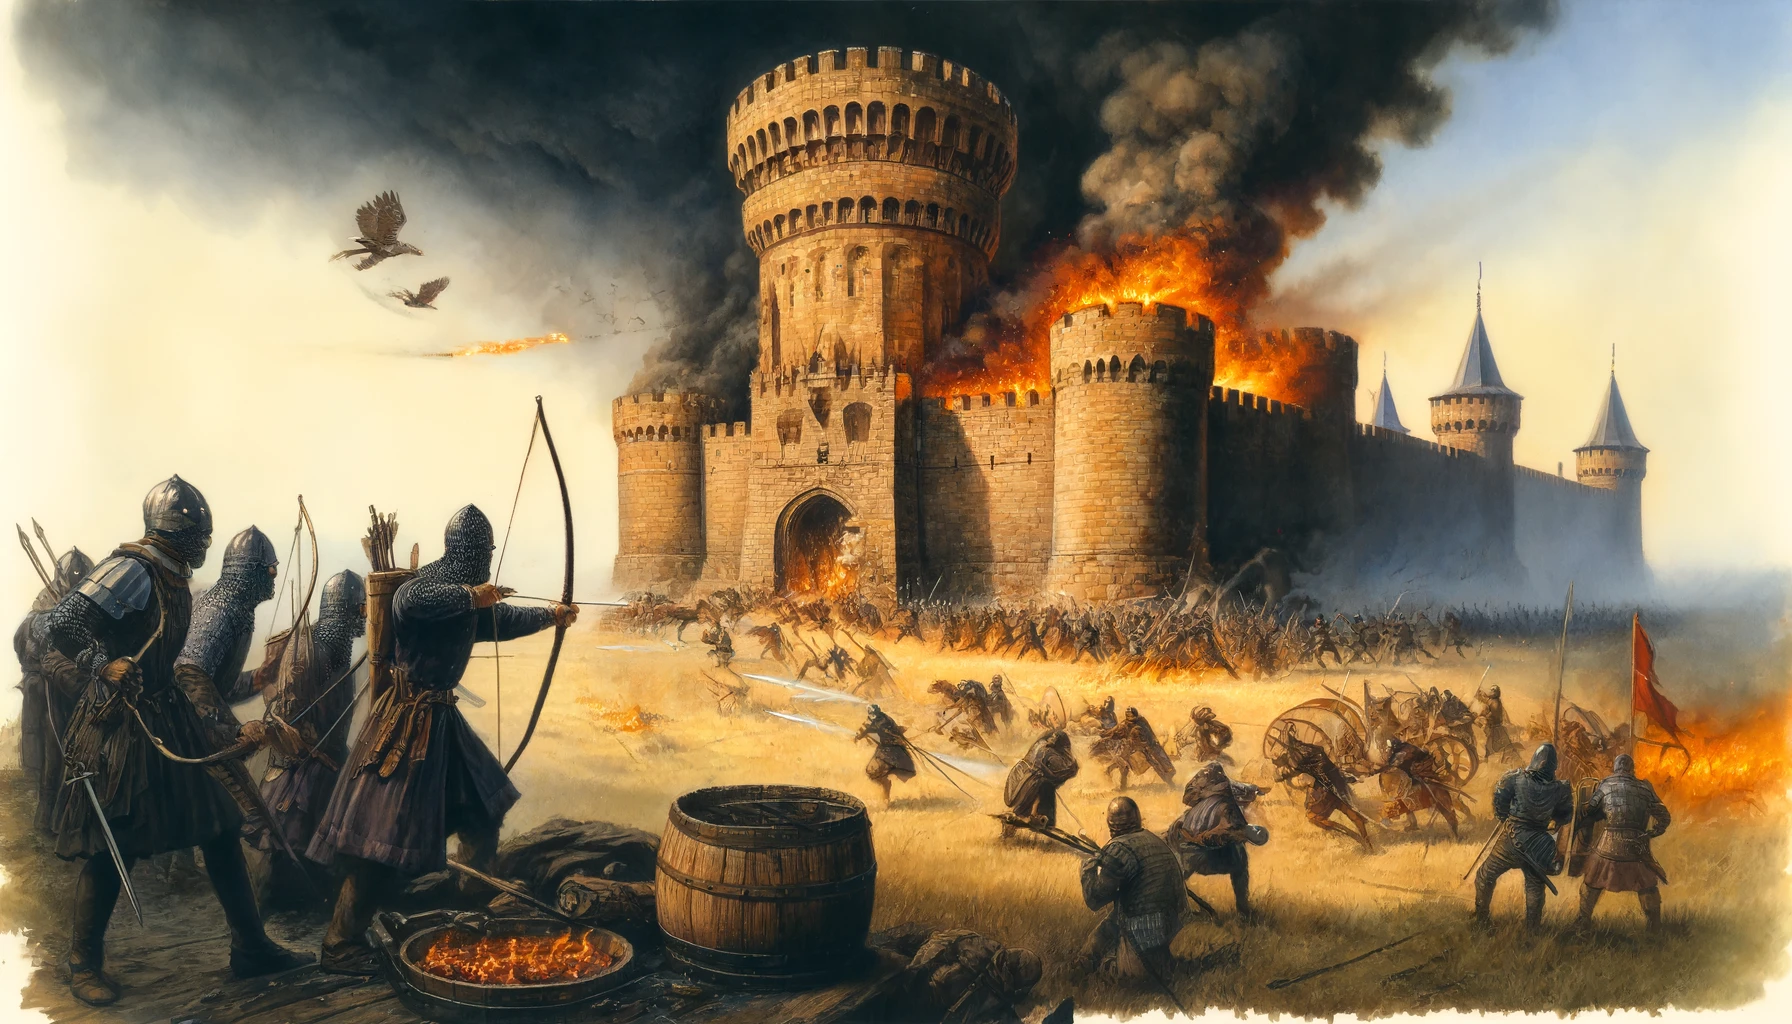 A massive siege tower approaches castle walls under heavy fire.